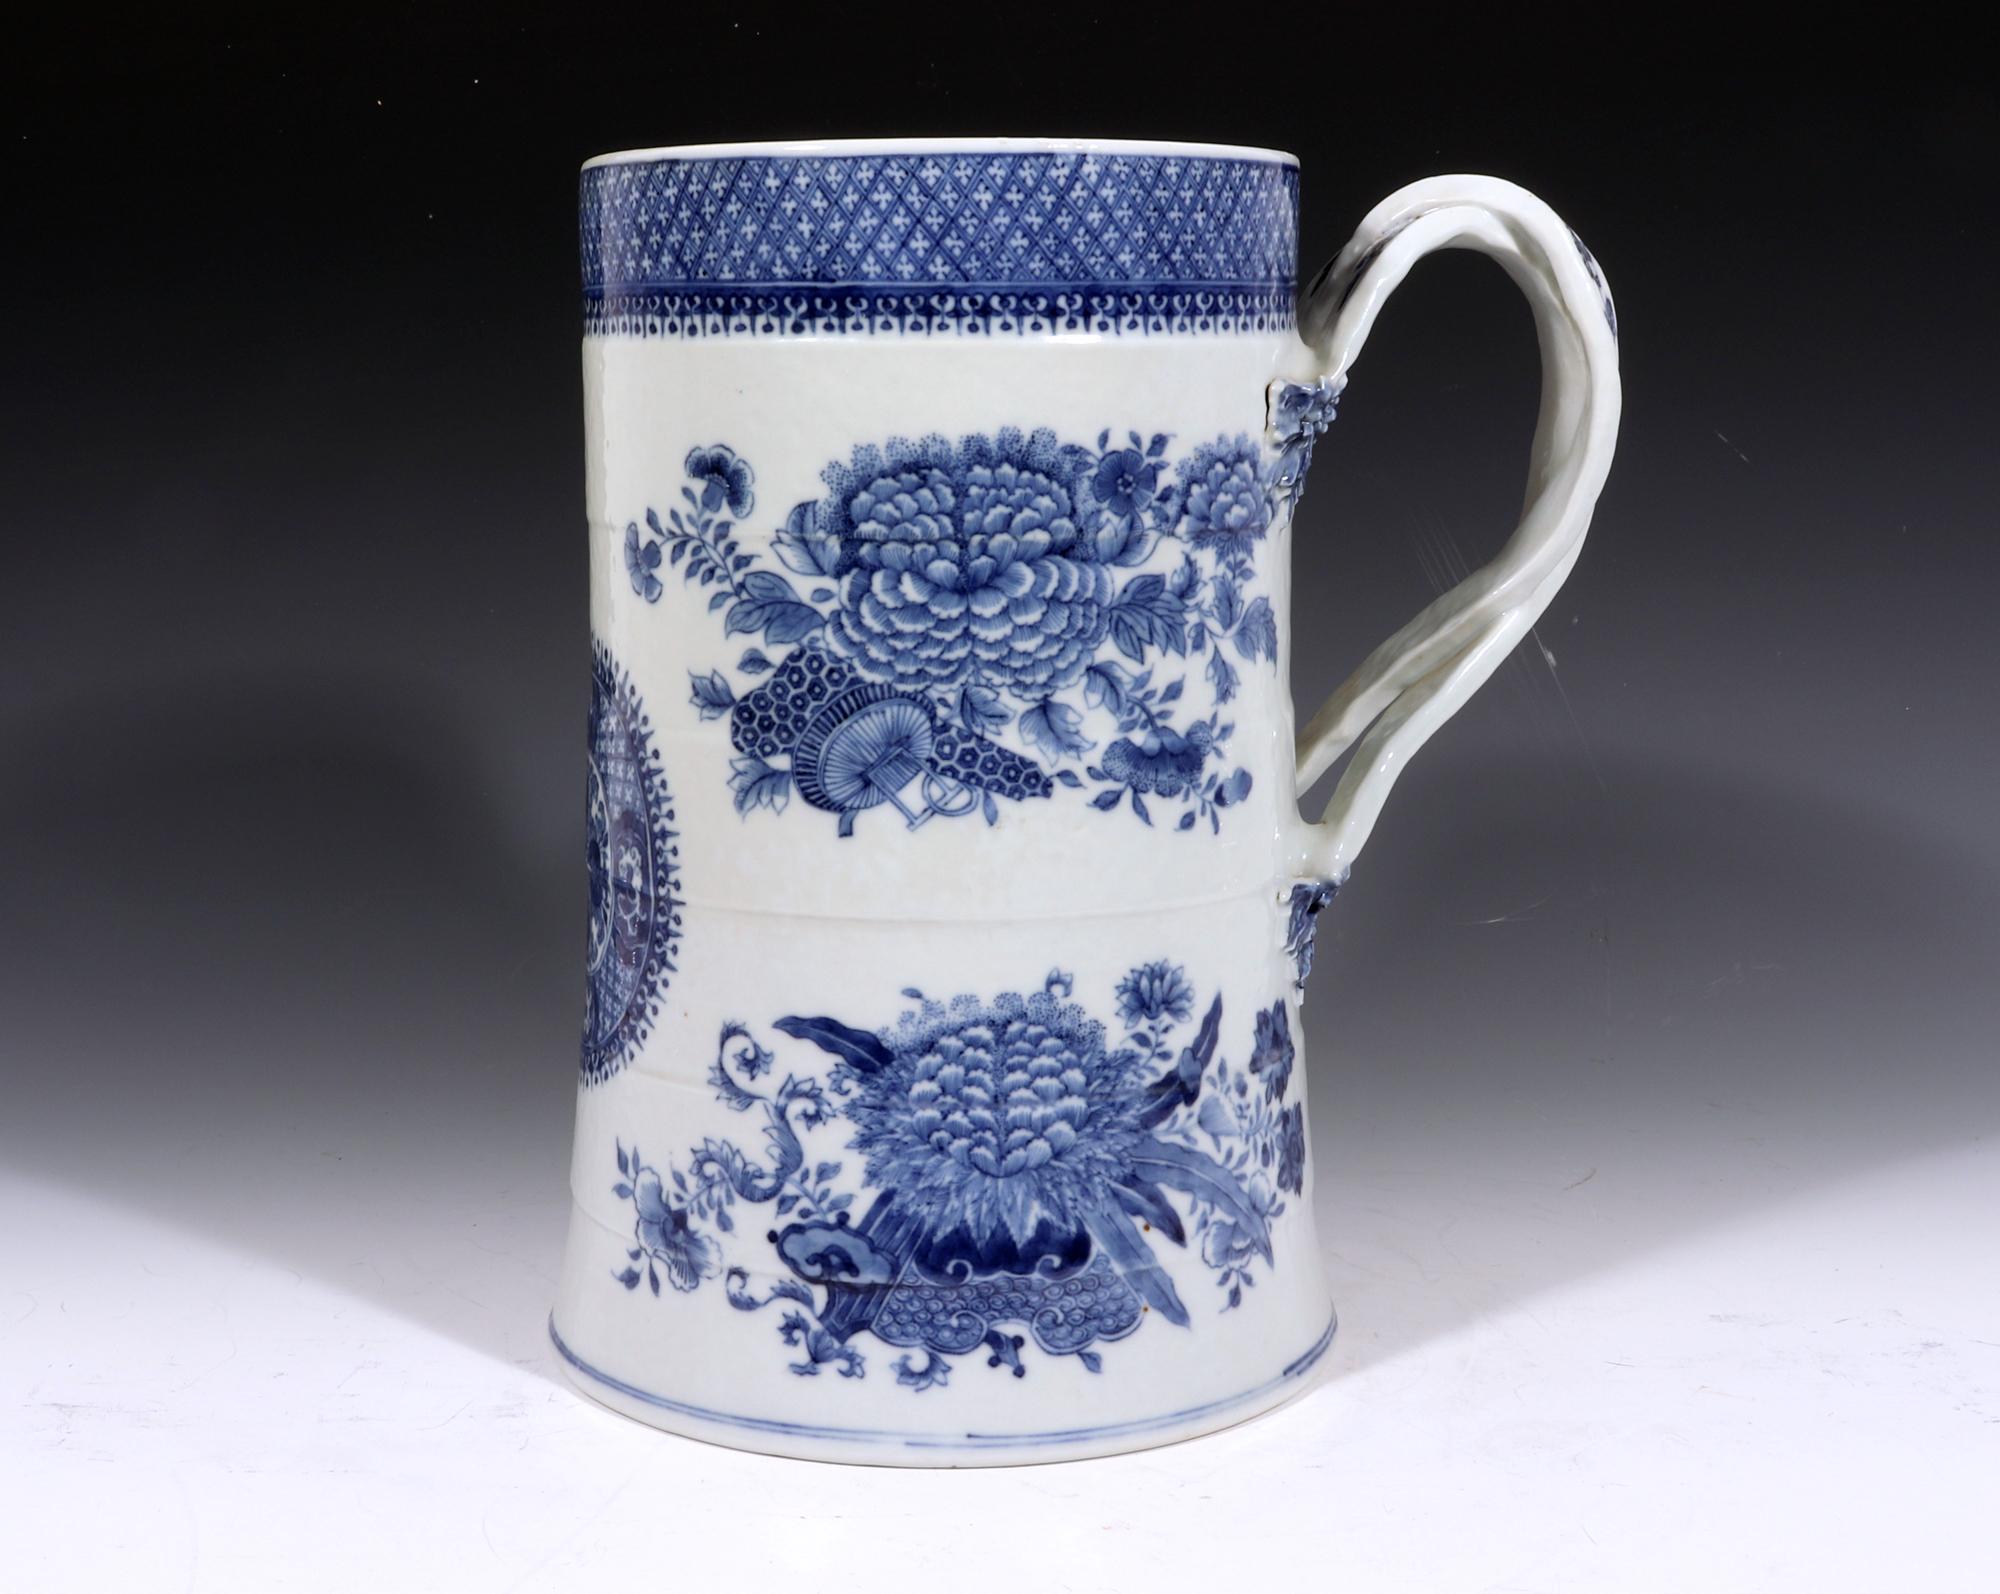 Perfect for flowers!

Massive Chinese Export Porcelain Blue & White Fitzhugh Tankard,
Circa 1800-20

The Chinese Export porcelain underglaze blue porcelain tankard is of a massive size. This type of tankard was considered to be used for